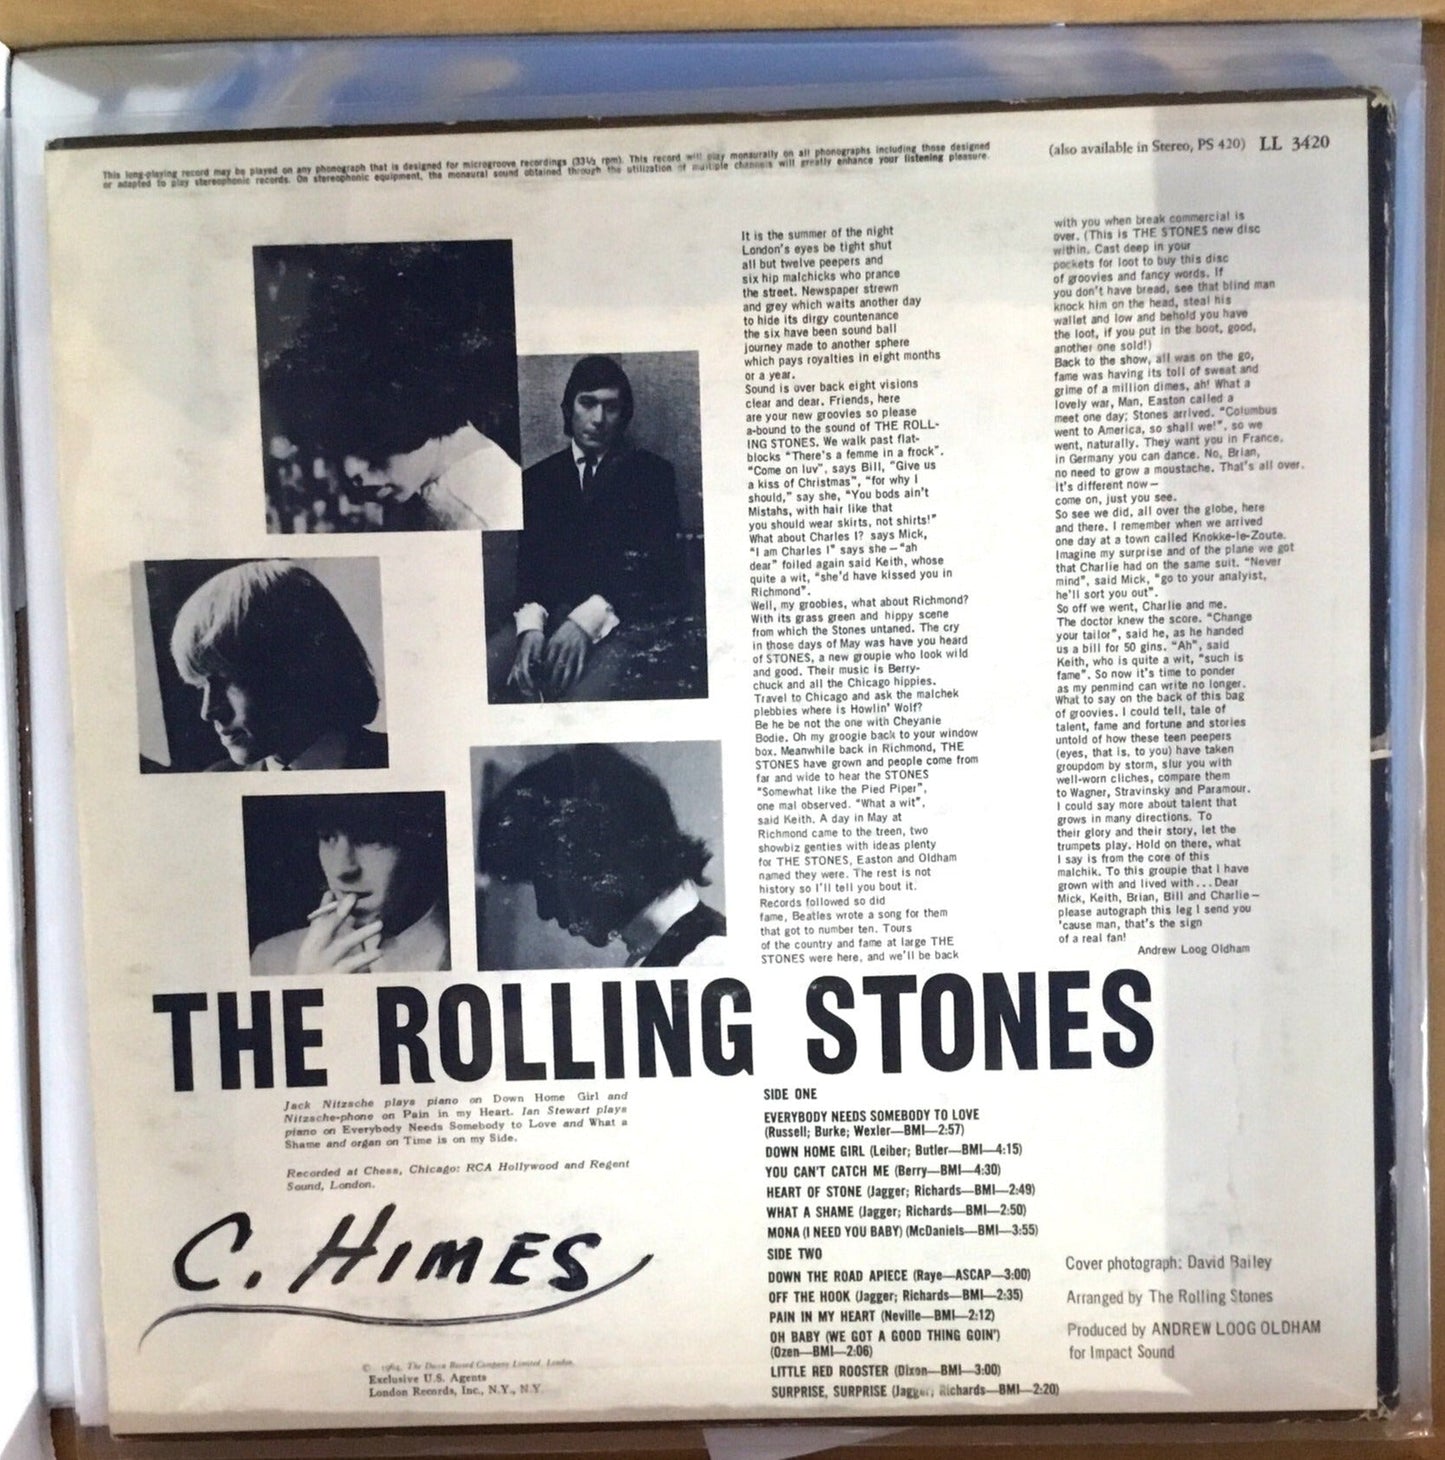 1965 The Rolling Stones, Now! Cover & Vinyl VG+ Cover VG London Mono LL-3420